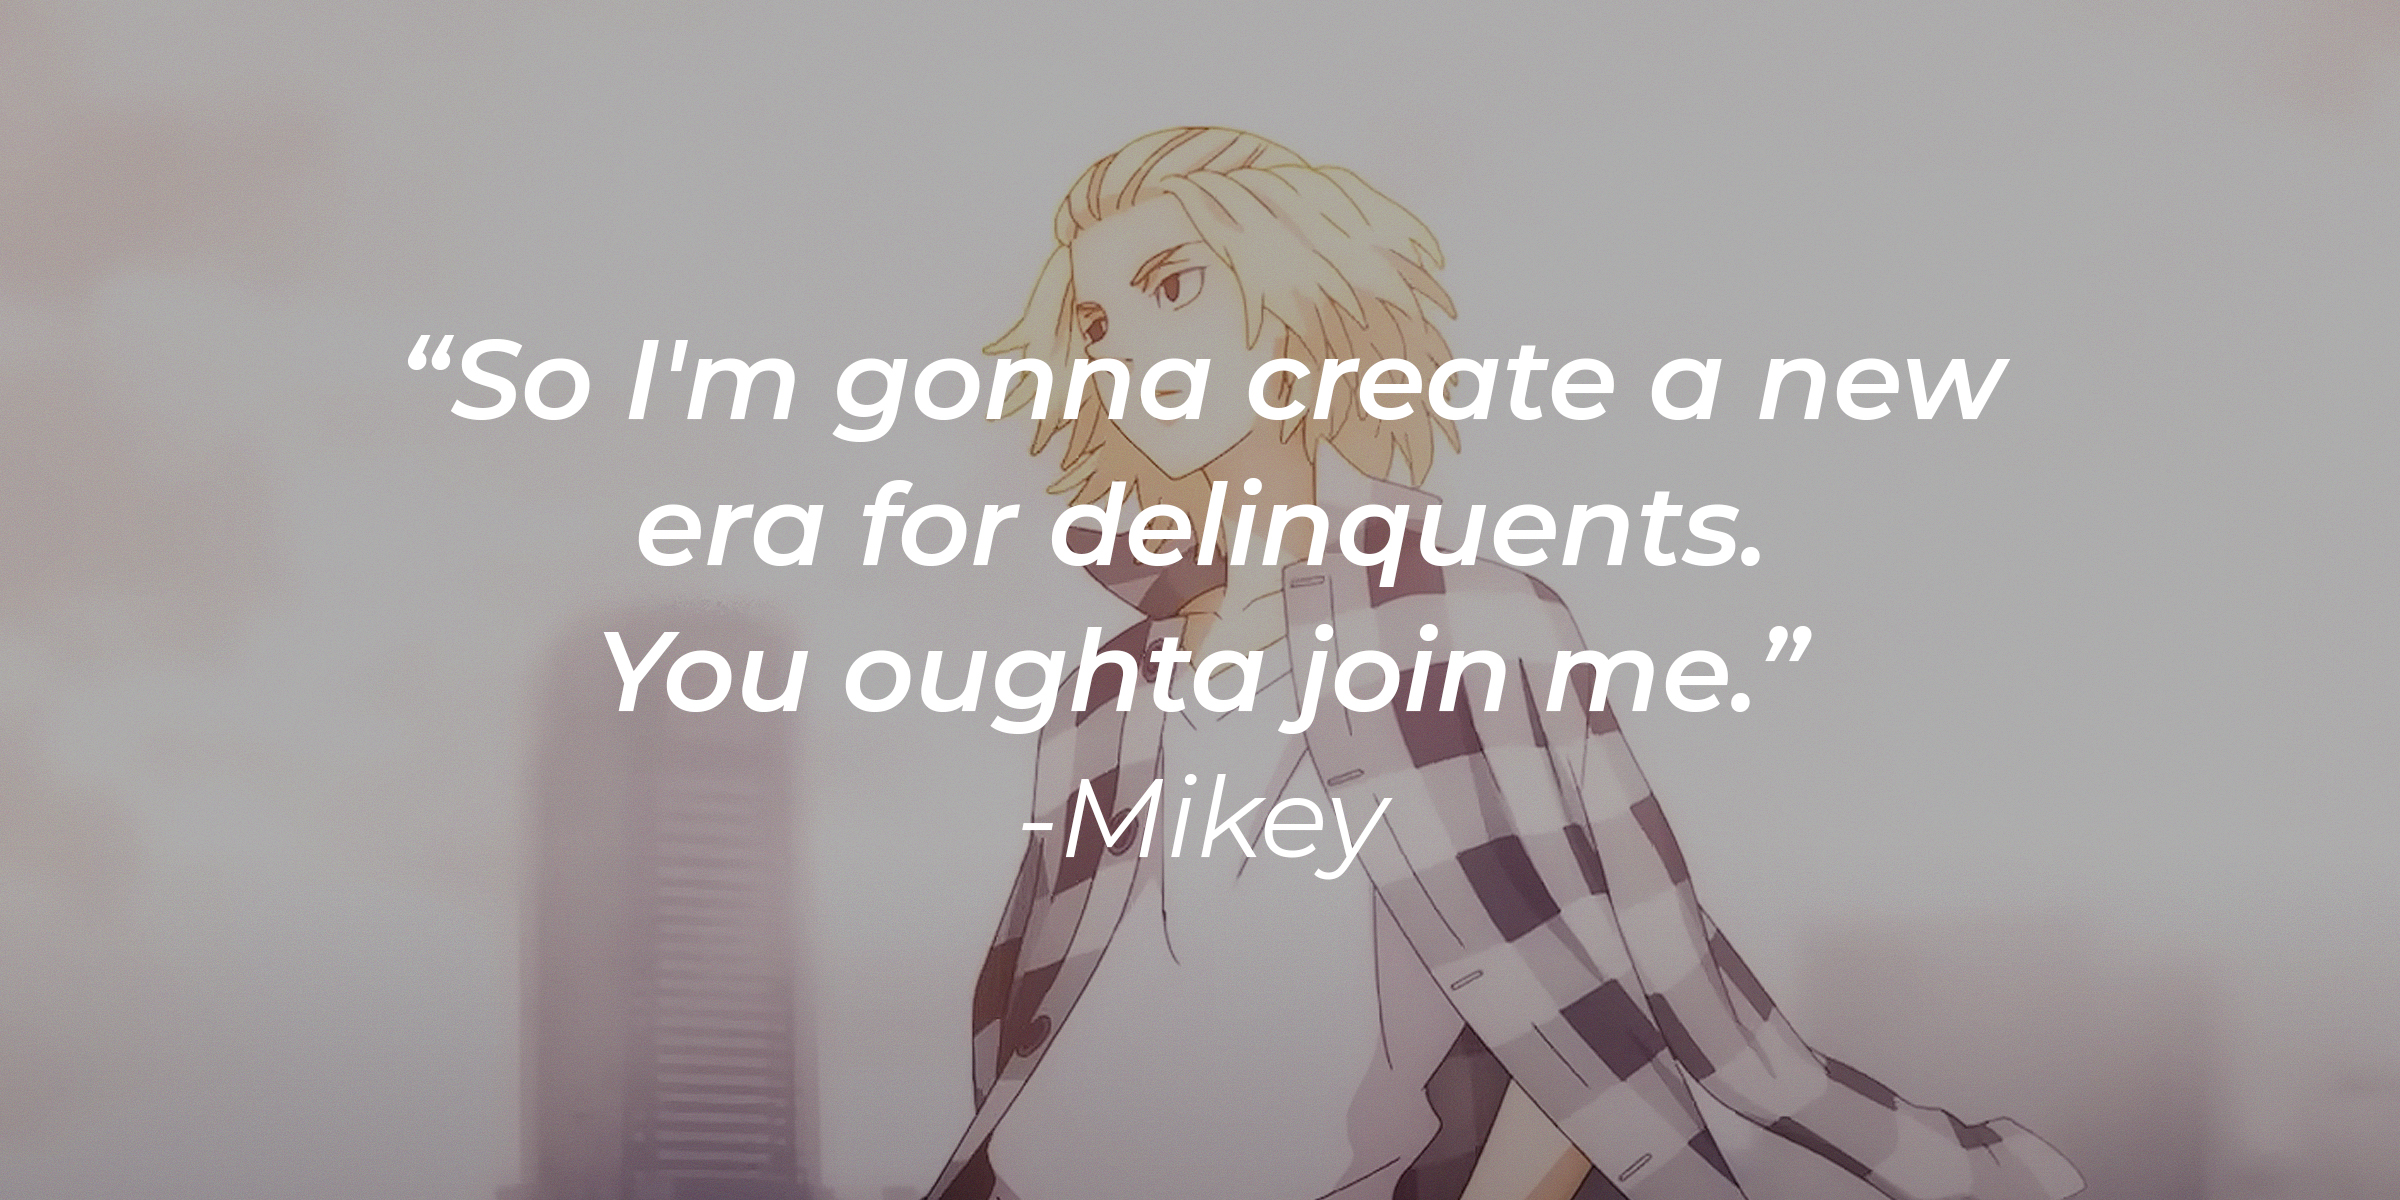 An image of Mikey with his quote: "So I'm gonna create a new era for delinquents. You oughta join me." | Source: youtube.com/CrunchyrollCollection